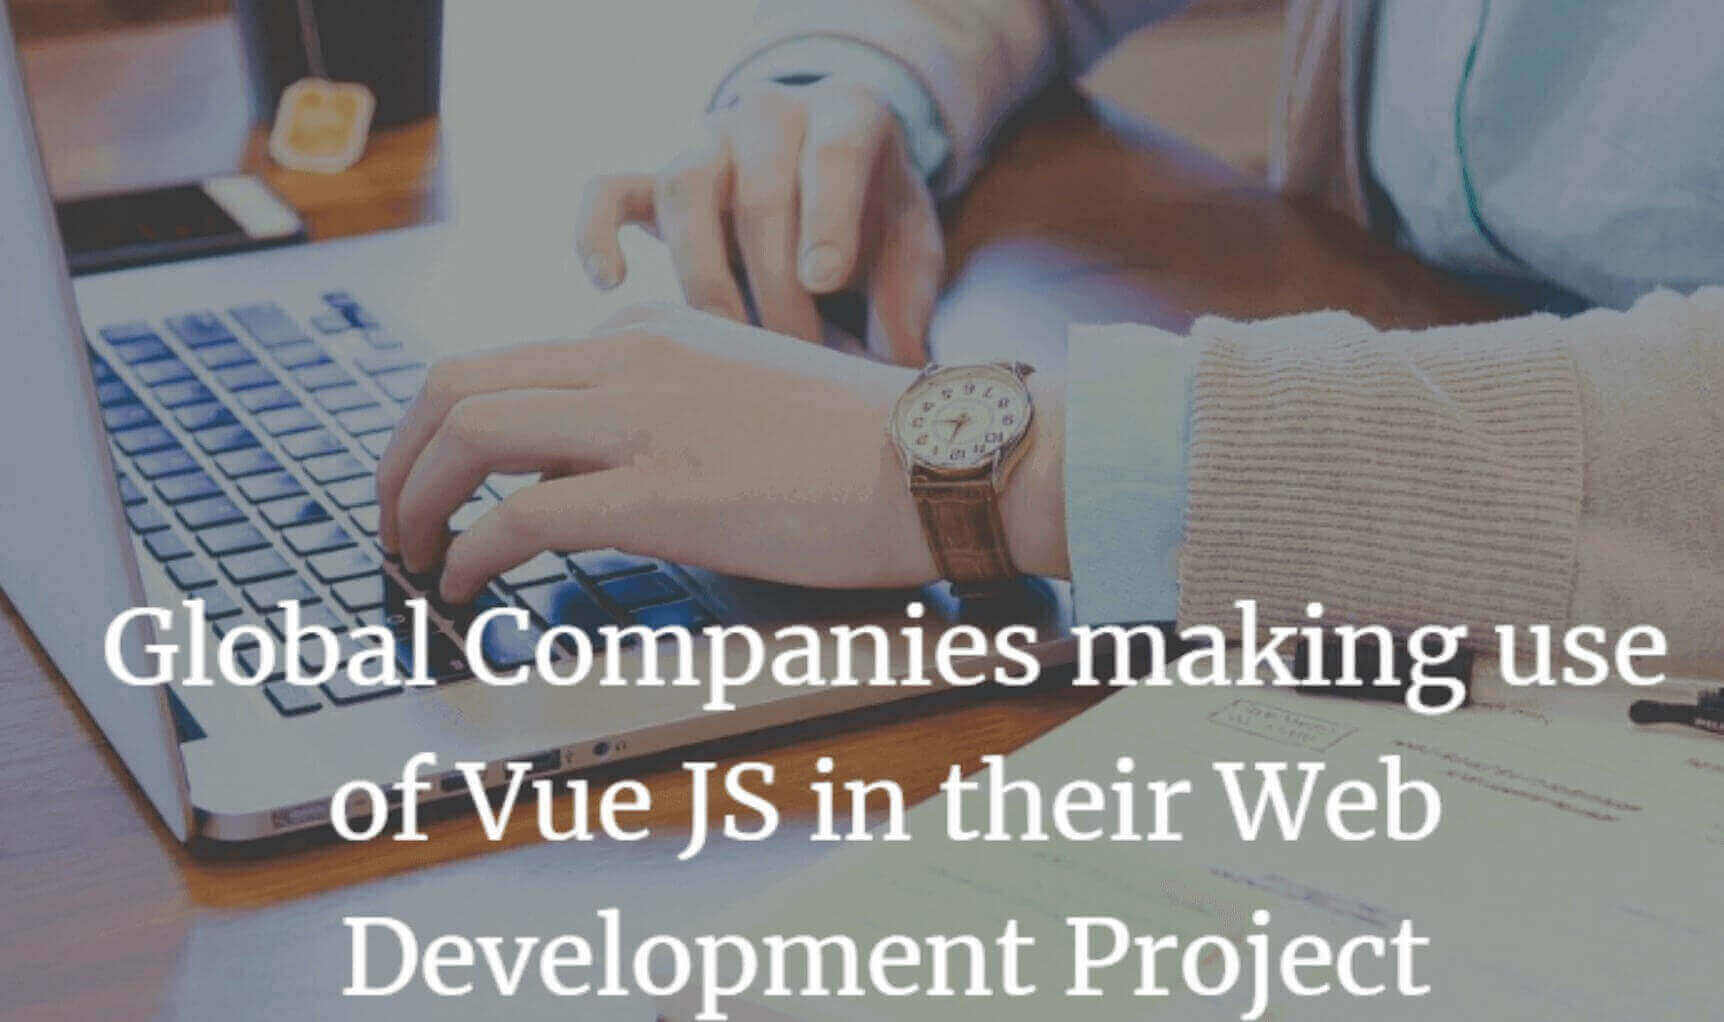 Global Companies making use of Vue JS in their Web Development Project